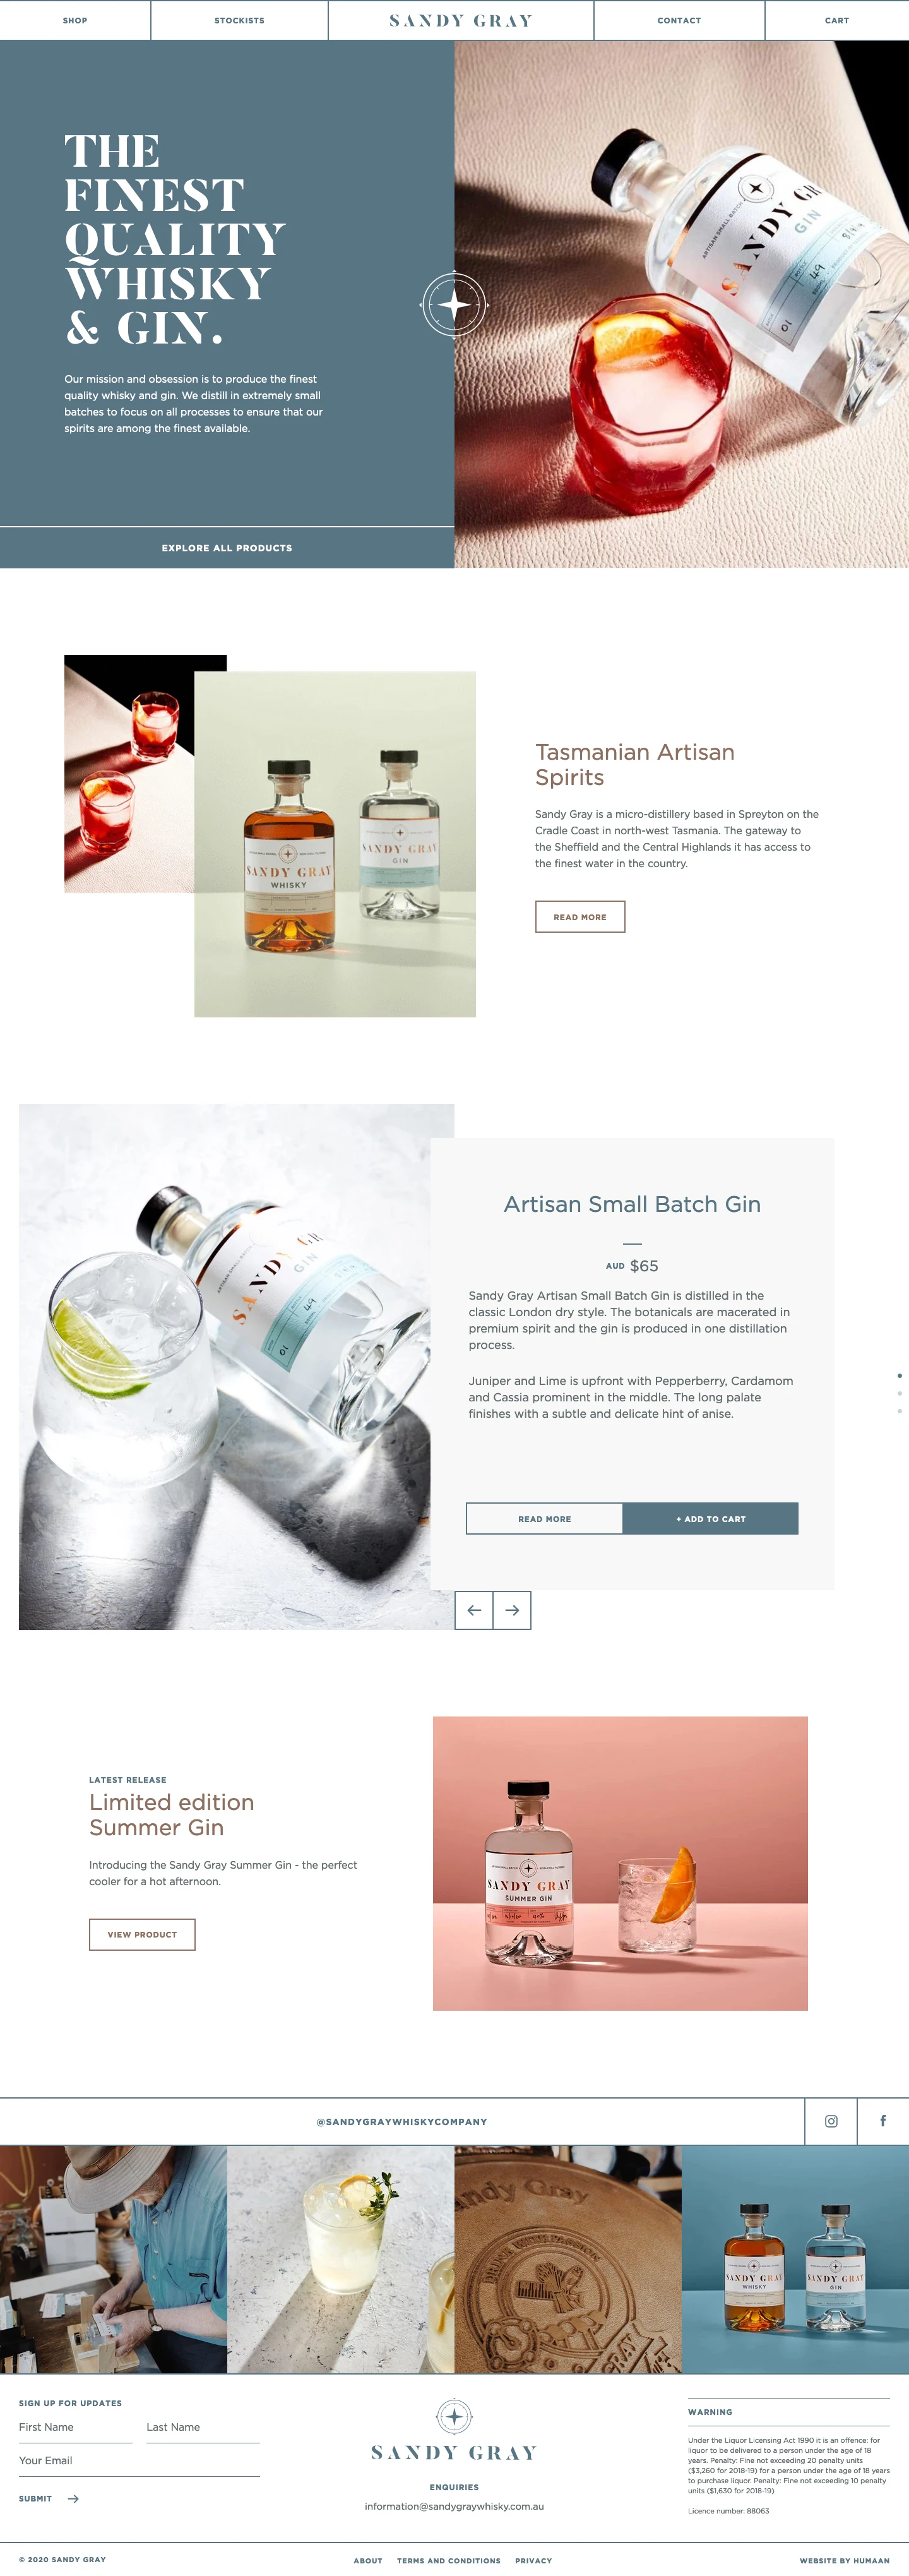 Sandy Gray Landing Page Example: Tasmania's smallest distillery, Sandy Gray specialises in hand-crafted, small-batch, bespoke spirits.